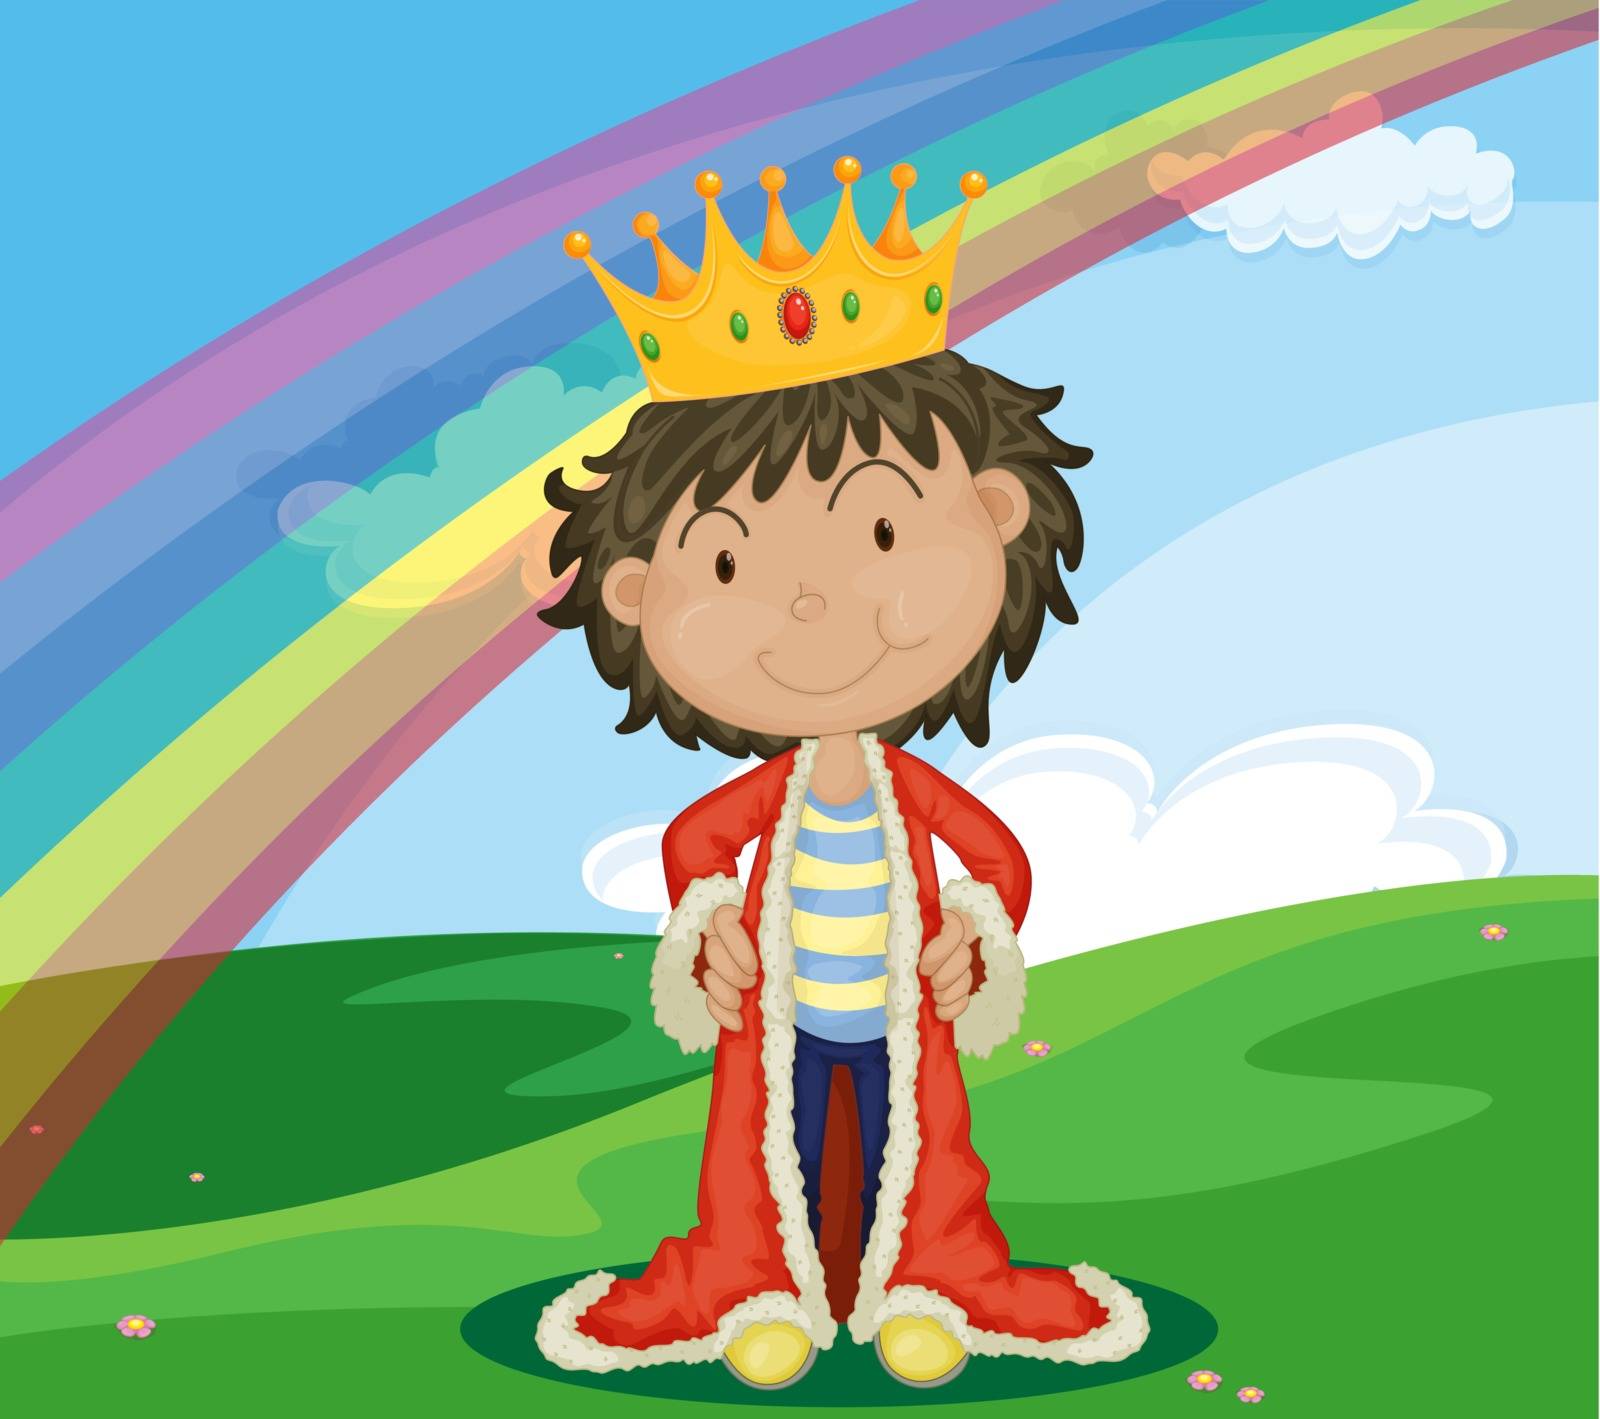 Young king in a field with rainbow